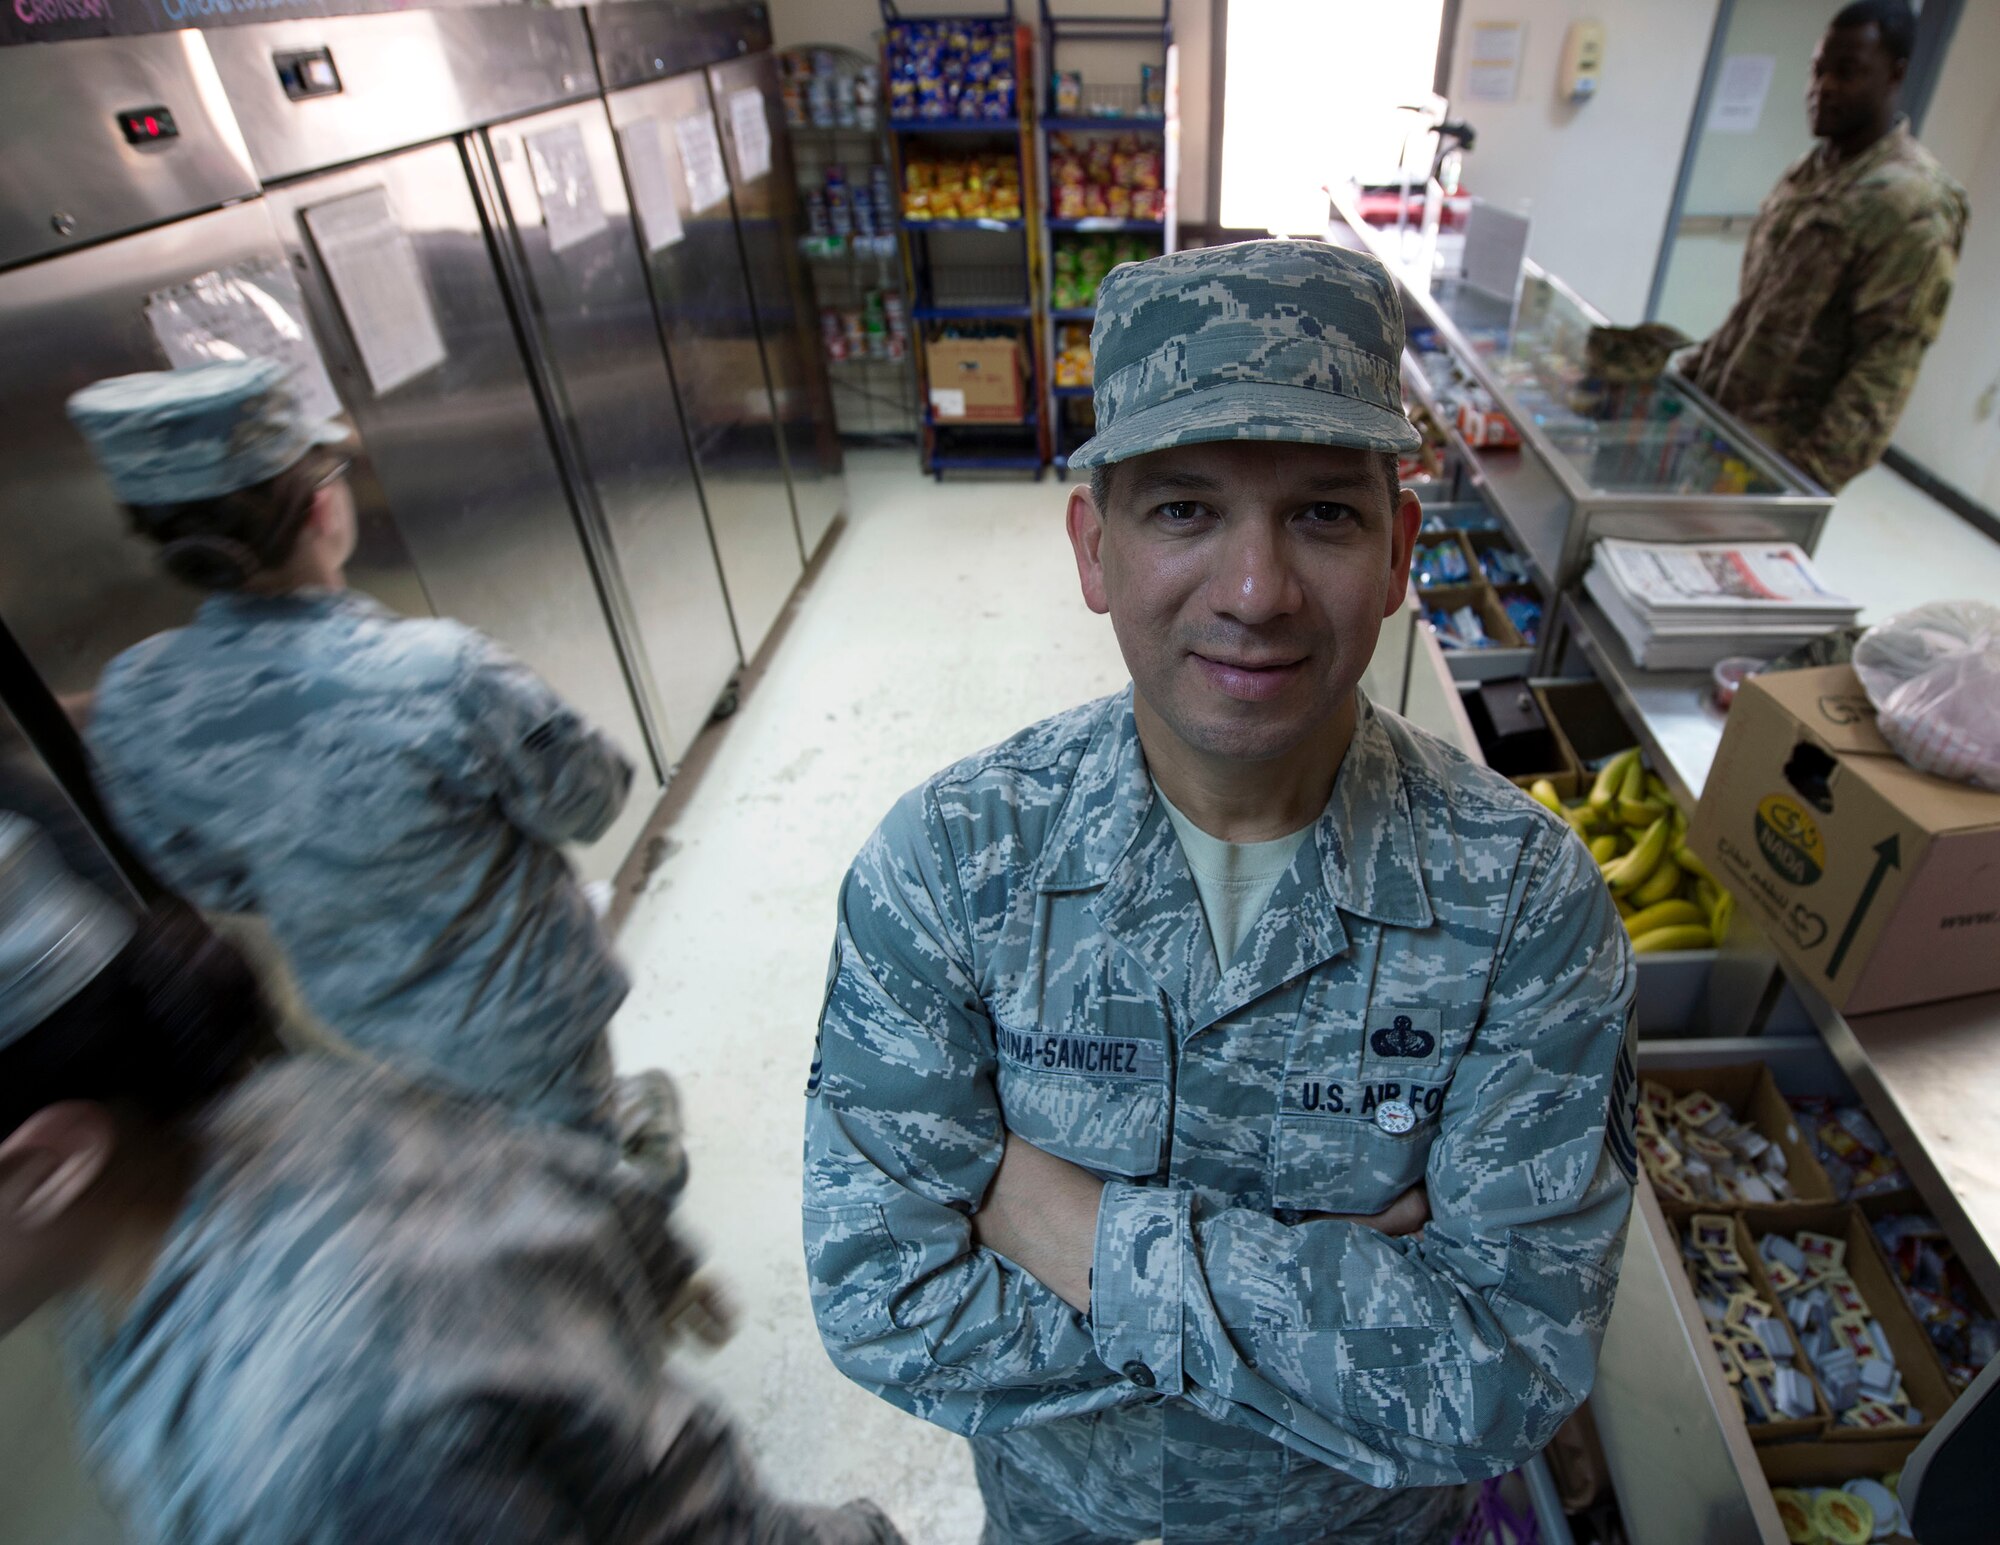 U.S. Air Force Master Sgt. Adrian Medina Sanchez, manager of the Hot Grab-n-Go kitchen with the 379th Expeditionary Force Support Squadron, poses for a photograph at Al Udeid Air Base, Qatar, May 25, 2017. Medina Sanchez will be retiring from the Air Force after twenty four years of service which he never thought would turn into a career. (U.S. Air Force photo by Tech. Sgt. Amy M. Lovgren)